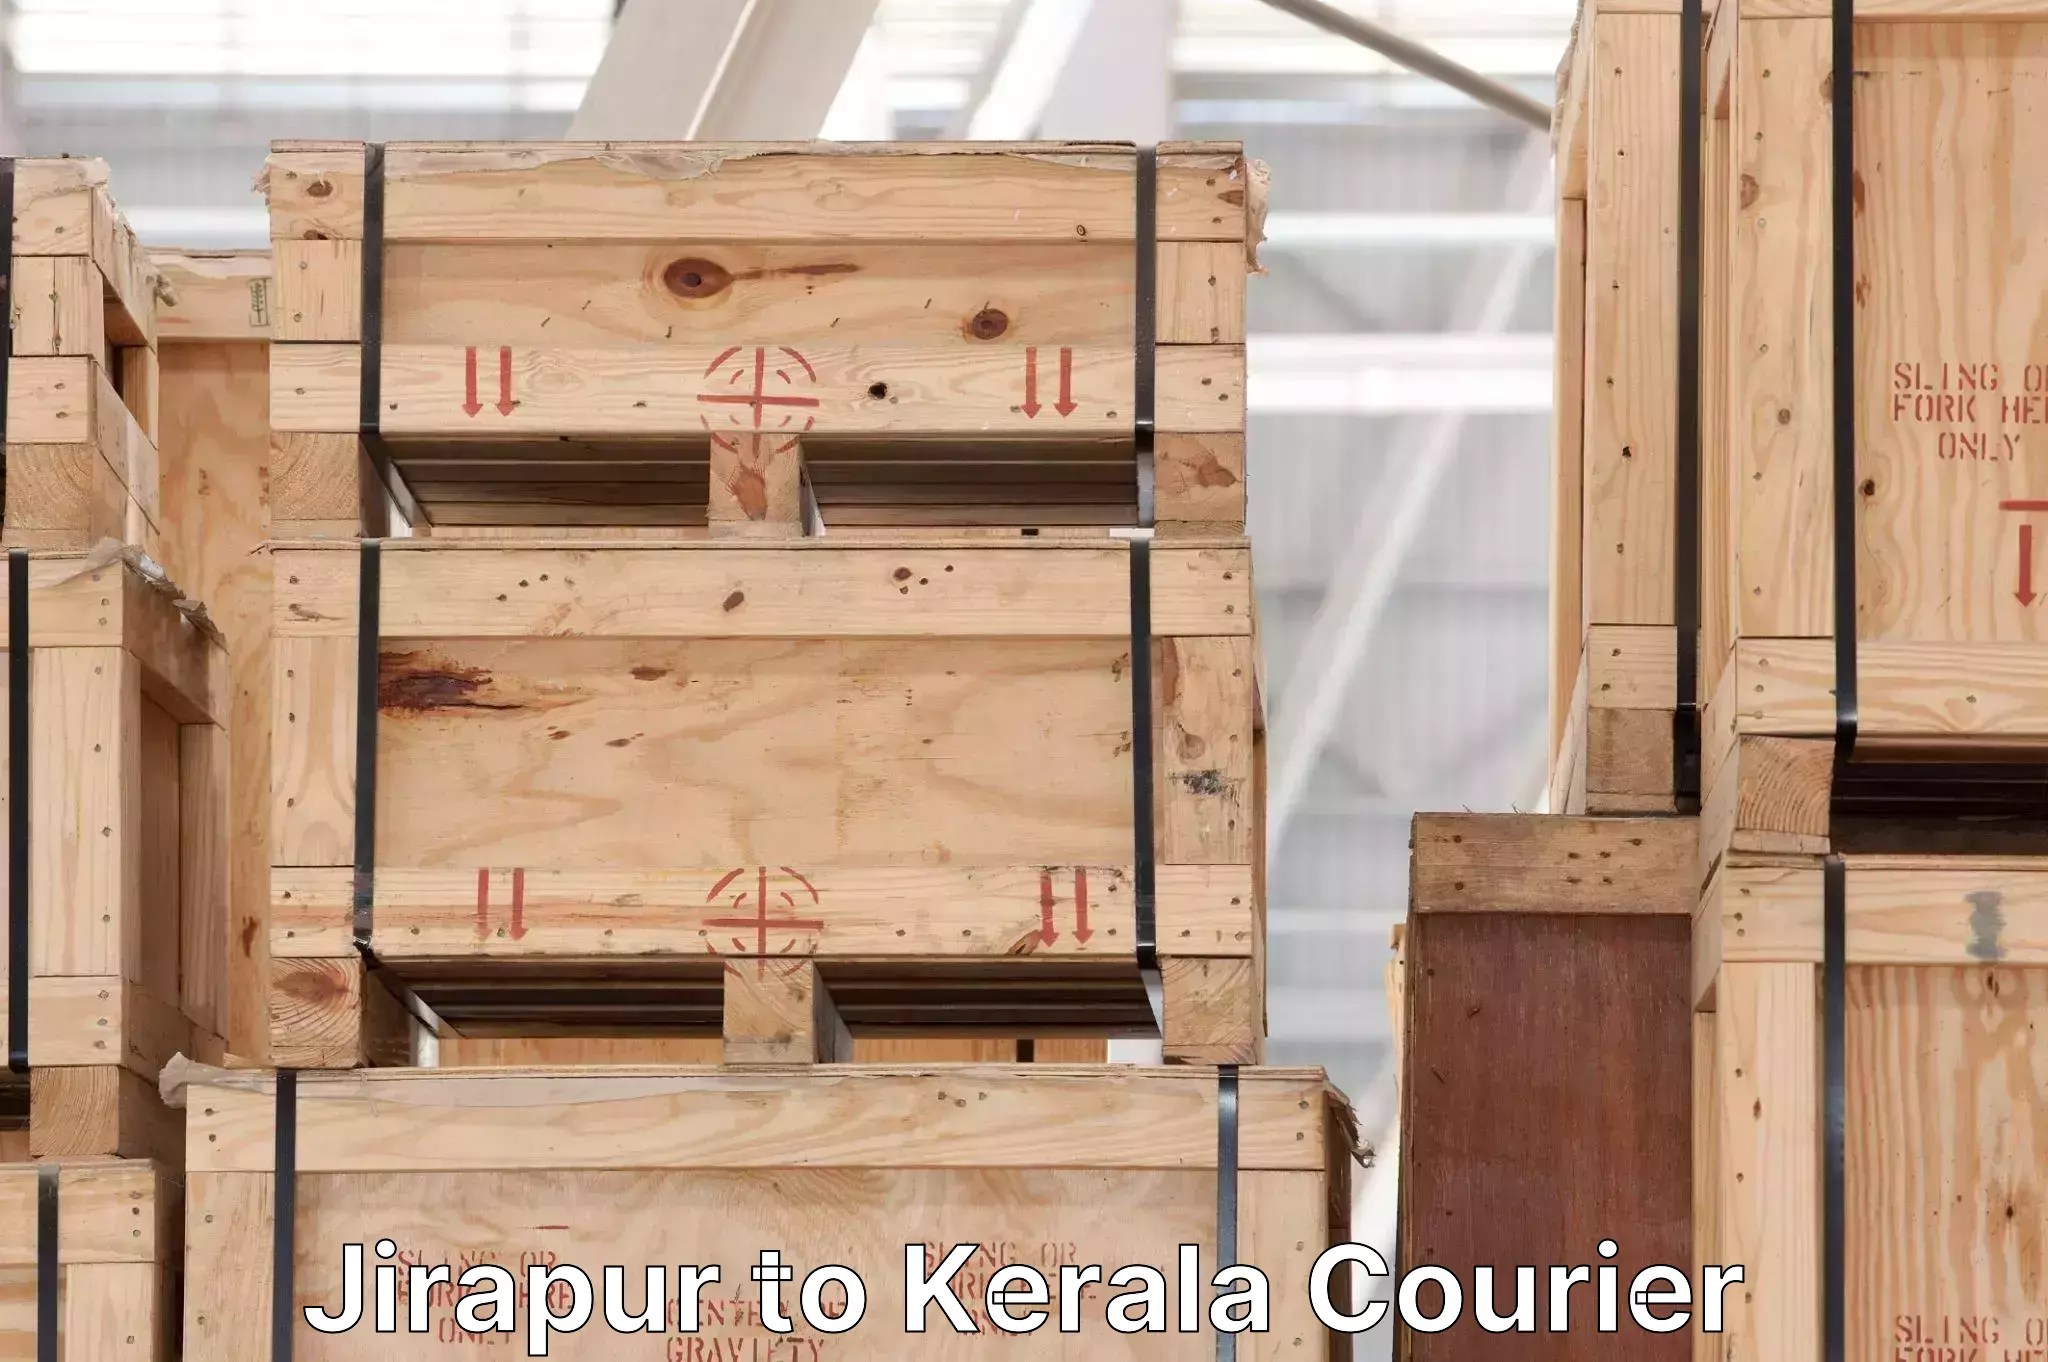 24/7 courier service Jirapur to Kerala